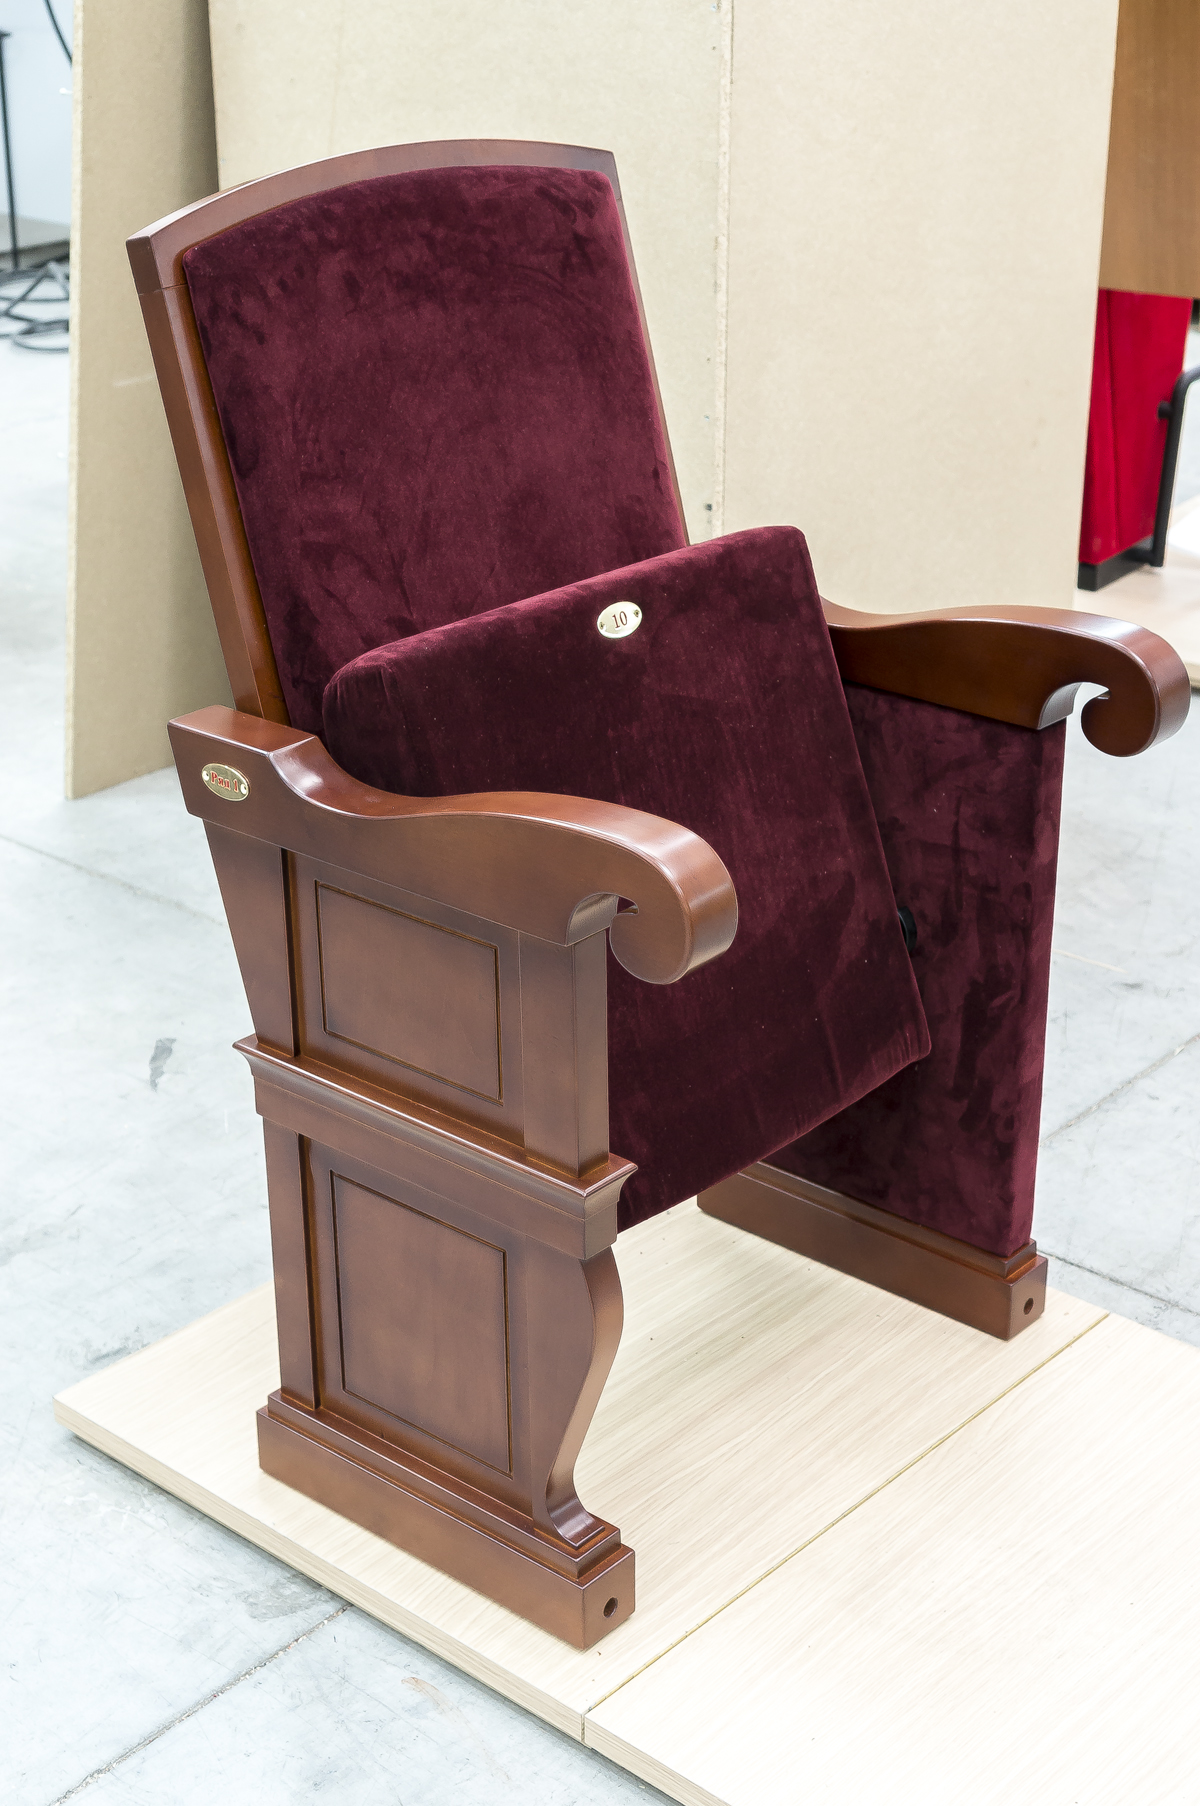 New Theatre Seating Chairs - NOVAT - photo 11